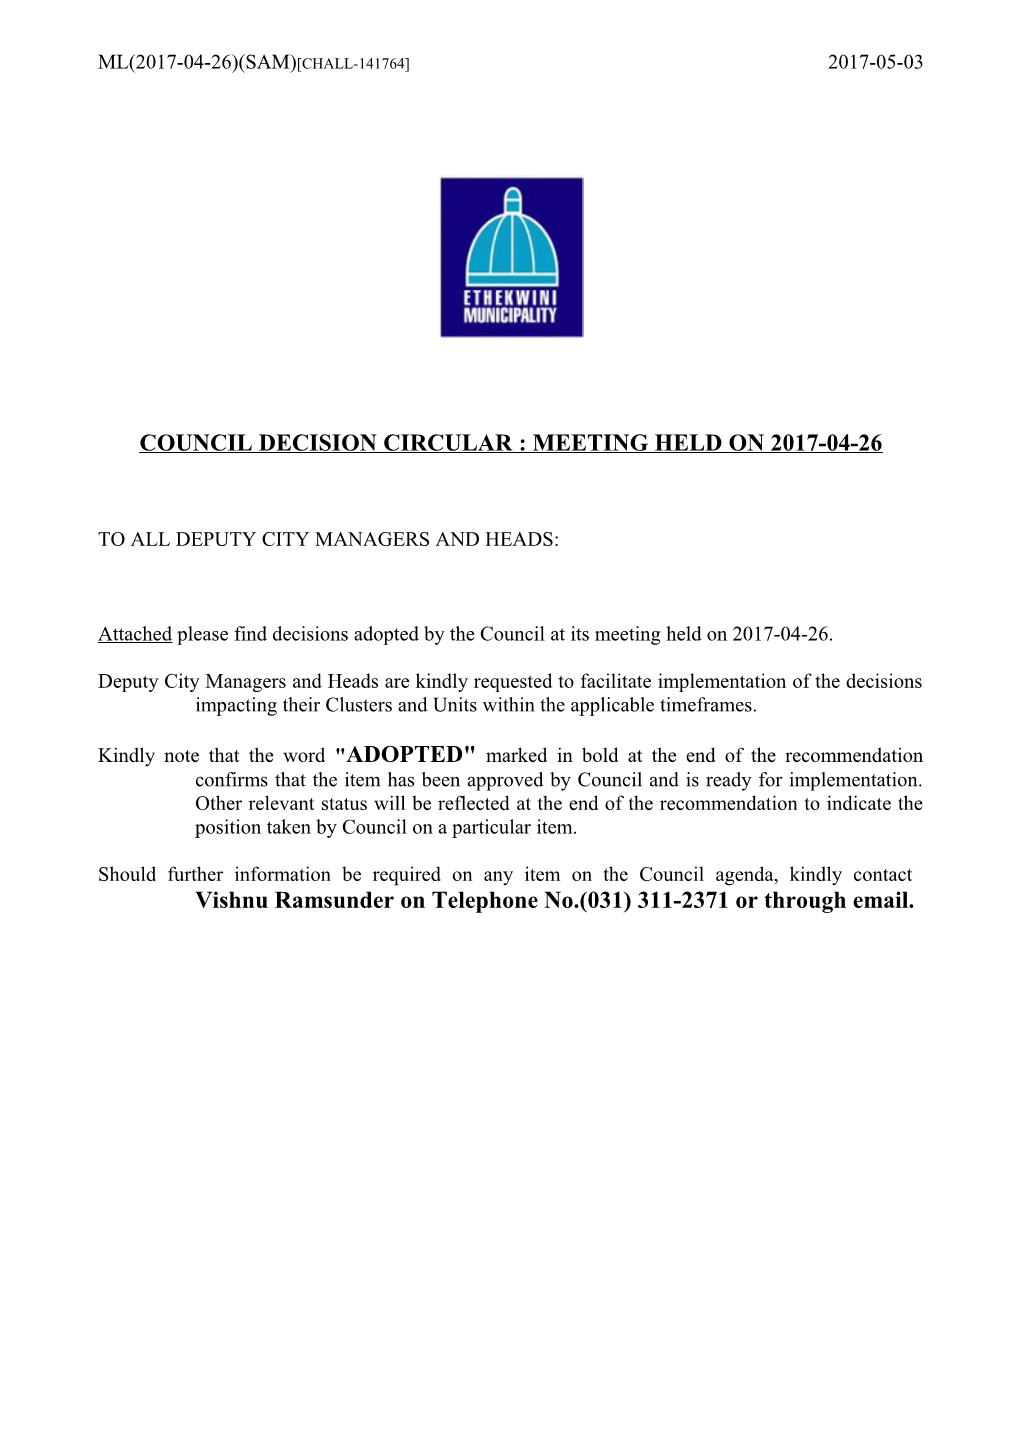 Council Decision Circular : Meeting Held on 2017-04-26